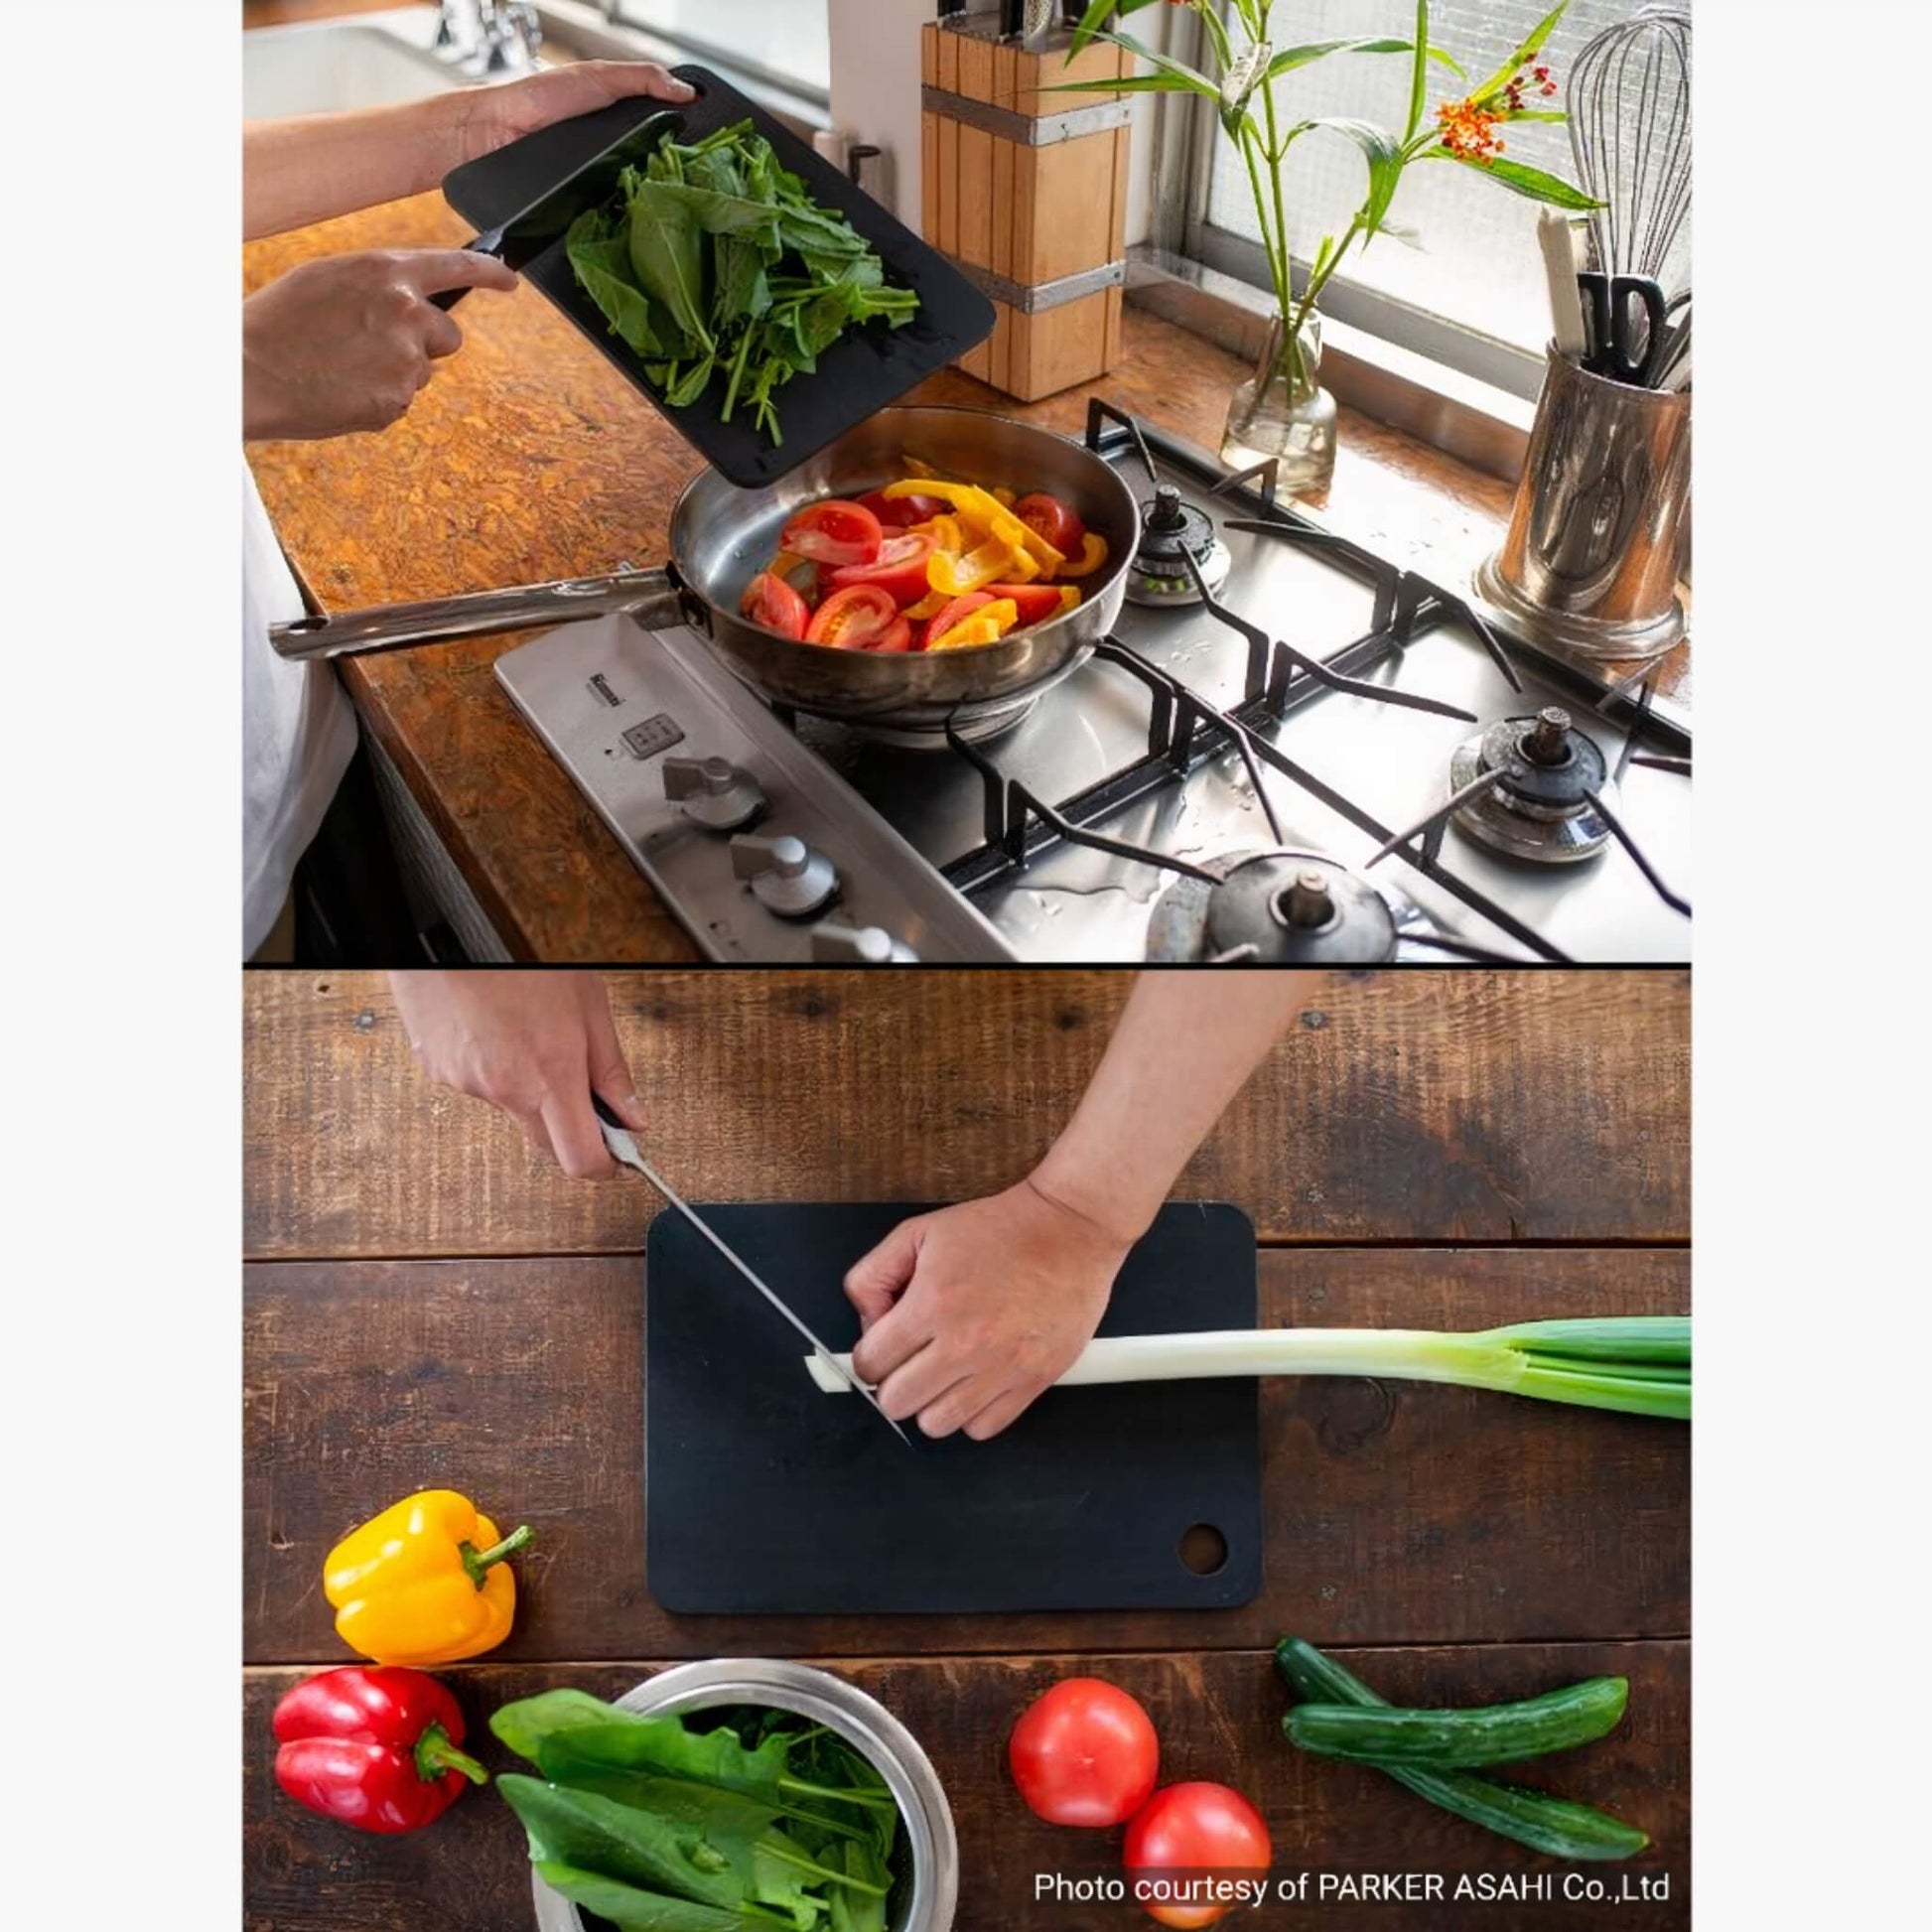 Asahi CookinCut - Synthetic Rubber Black Cutting Board for Home